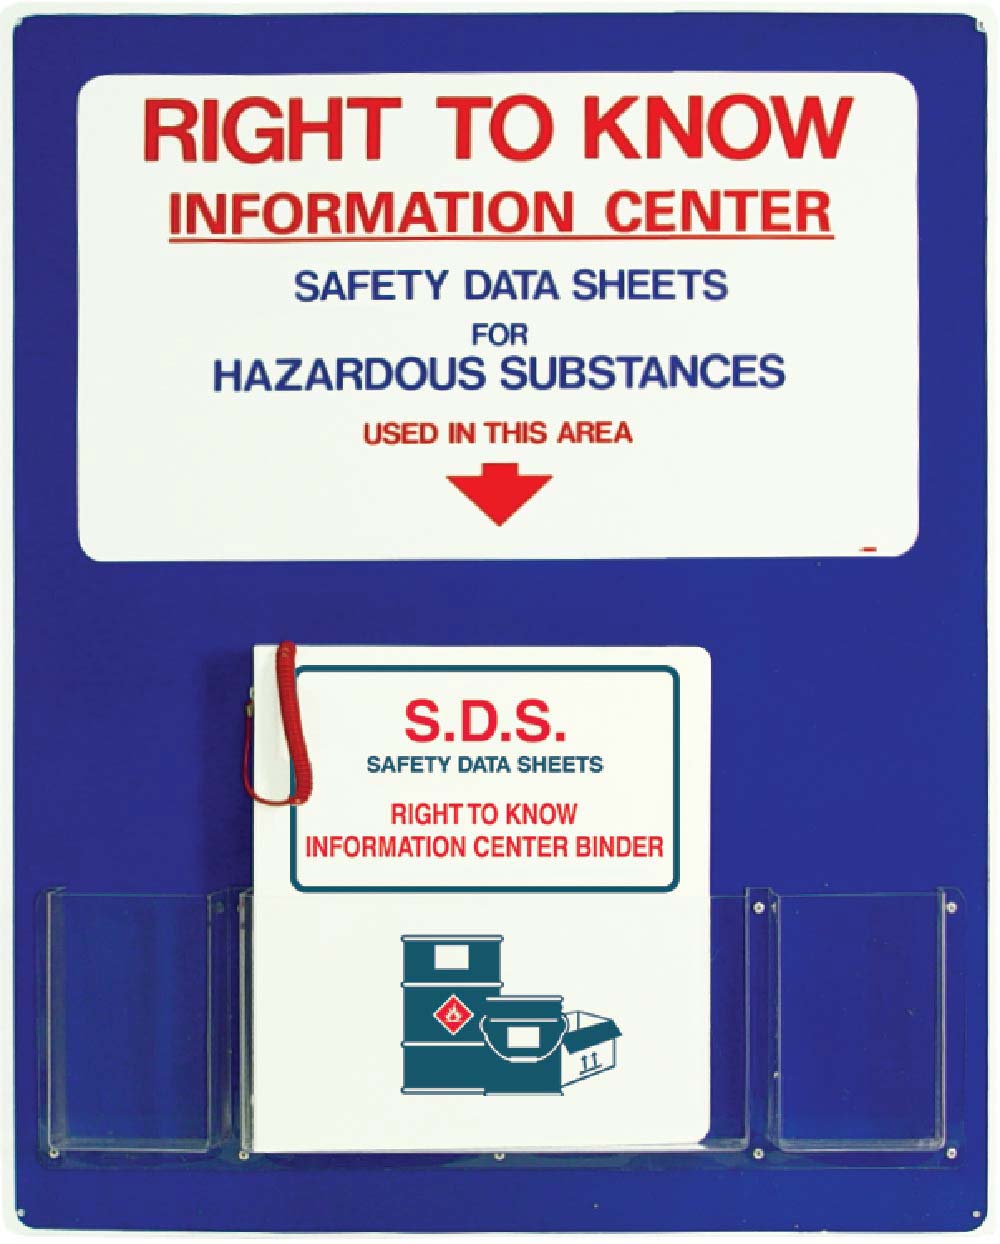 Right-To-Know Information Center-eSafety Supplies, Inc